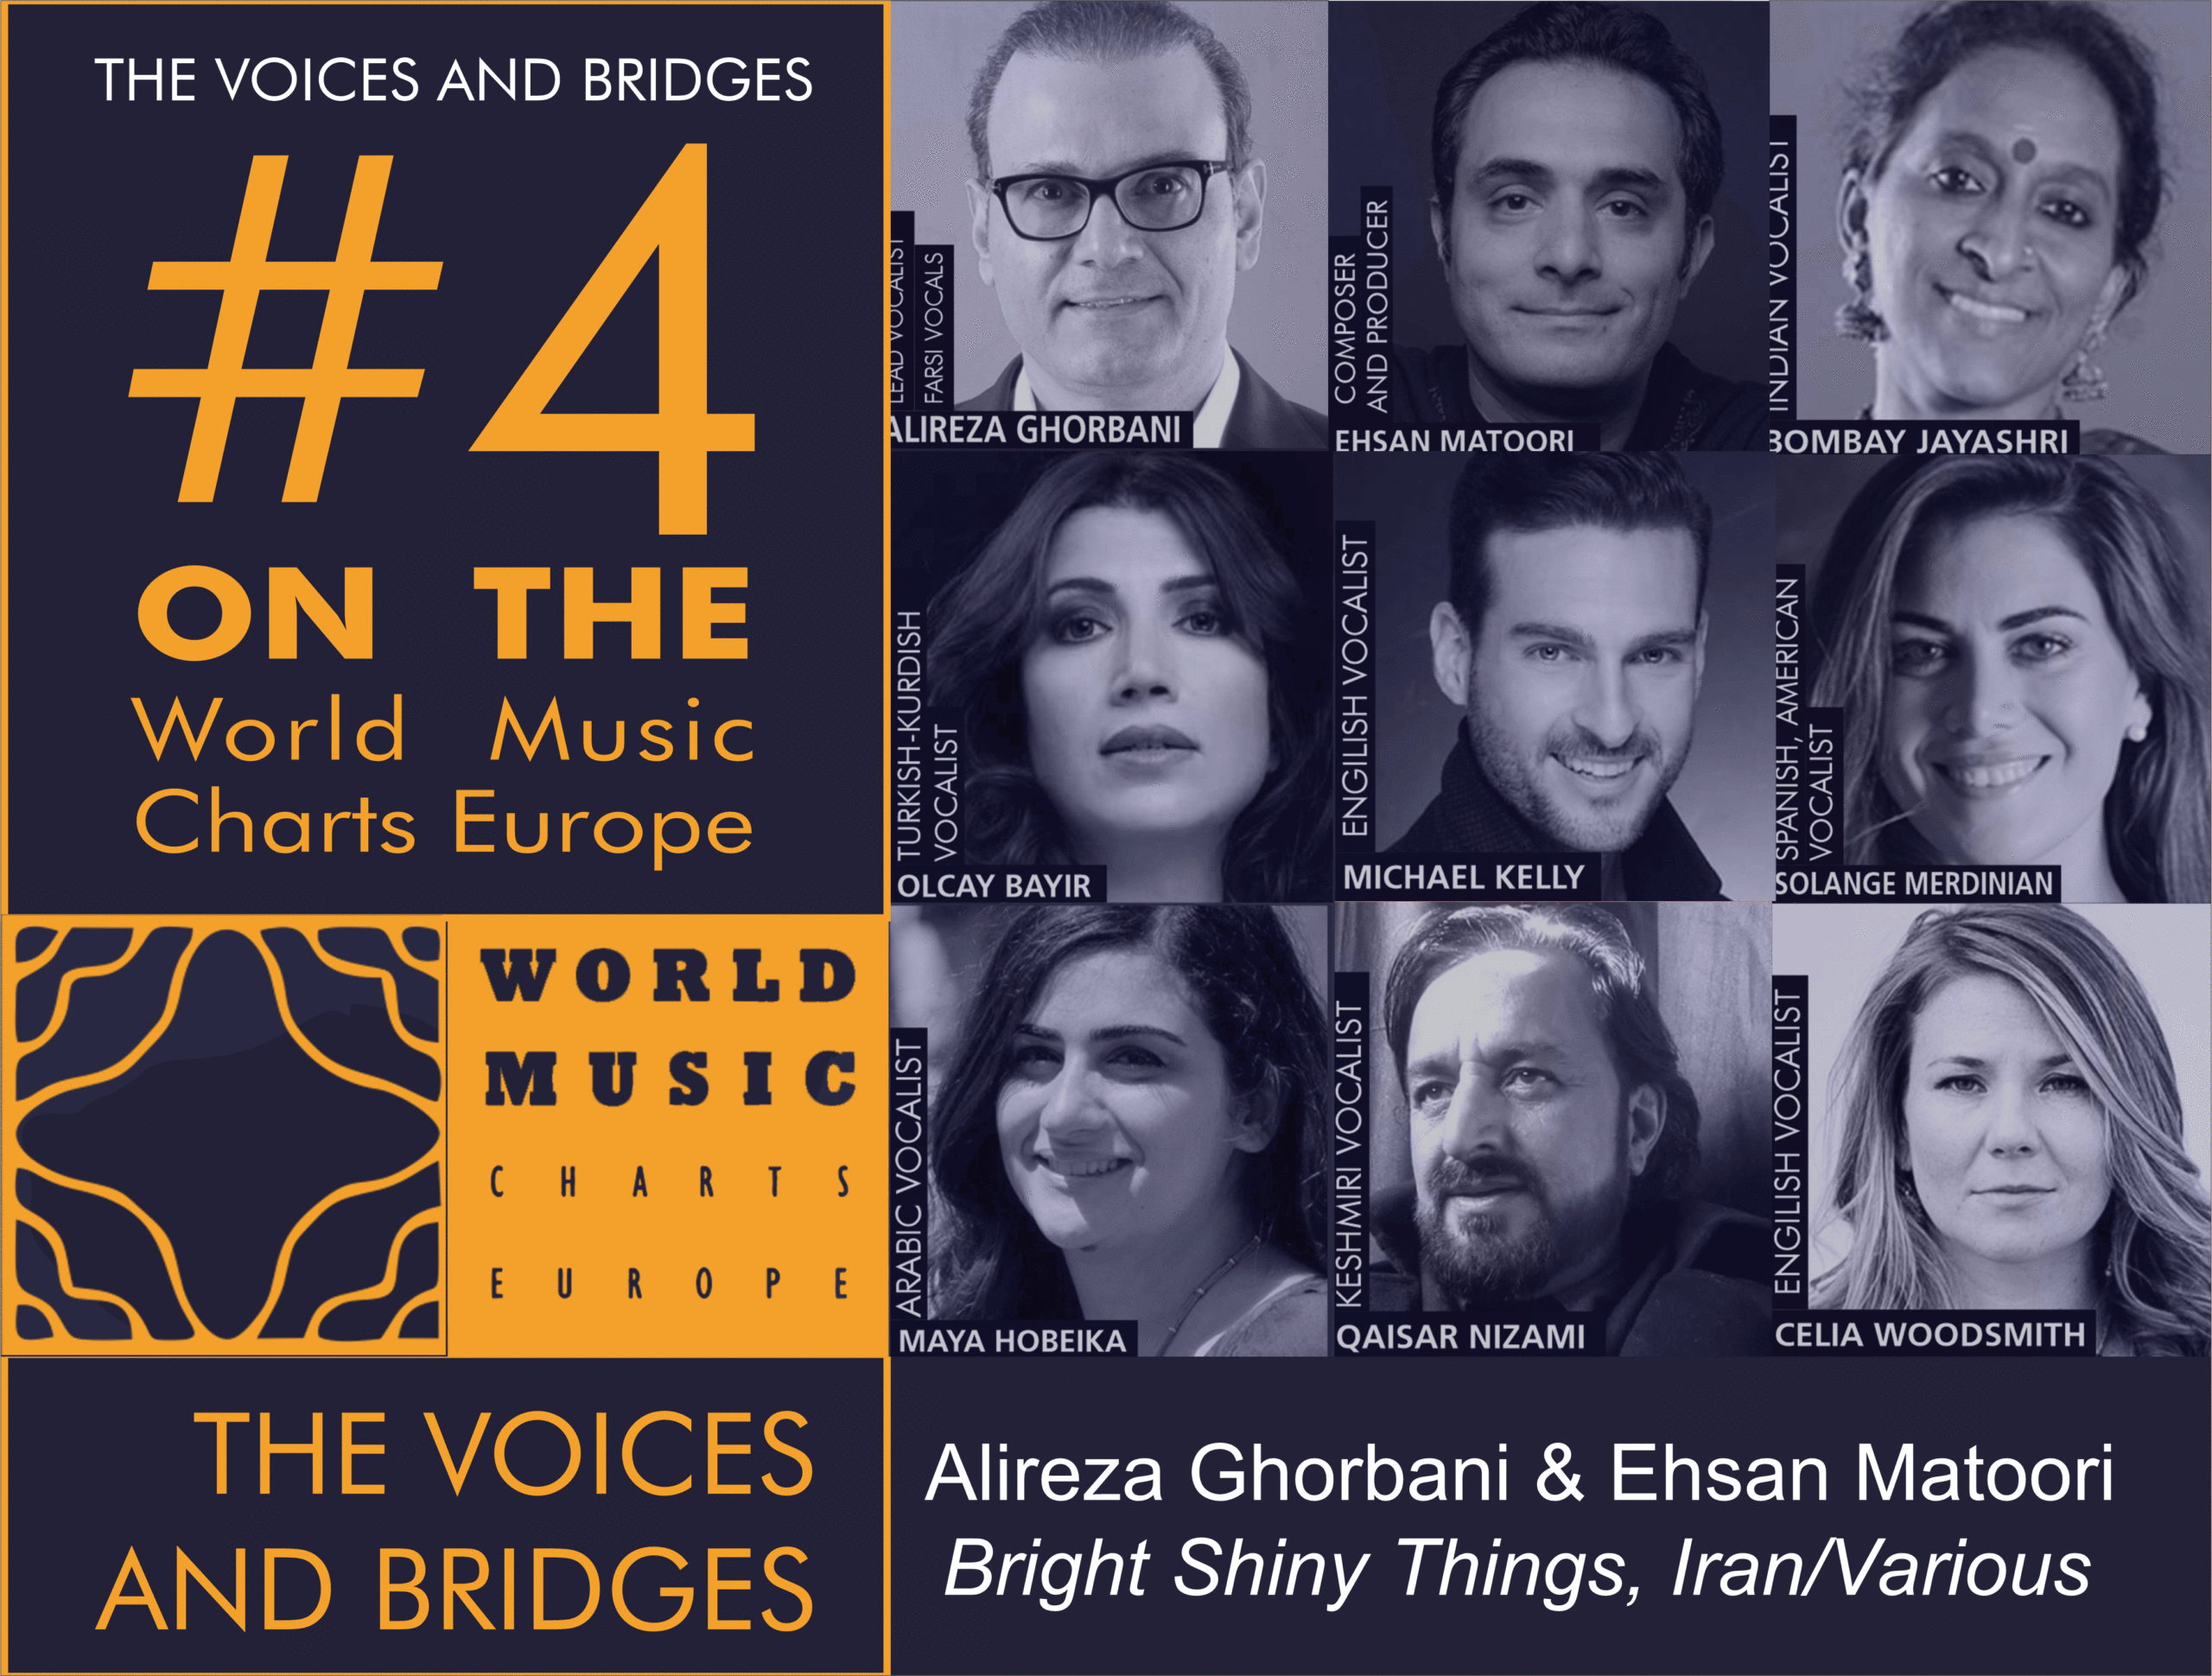 THE VOICES AND BRIDGES # 4 ON THE World Music Charts Europe